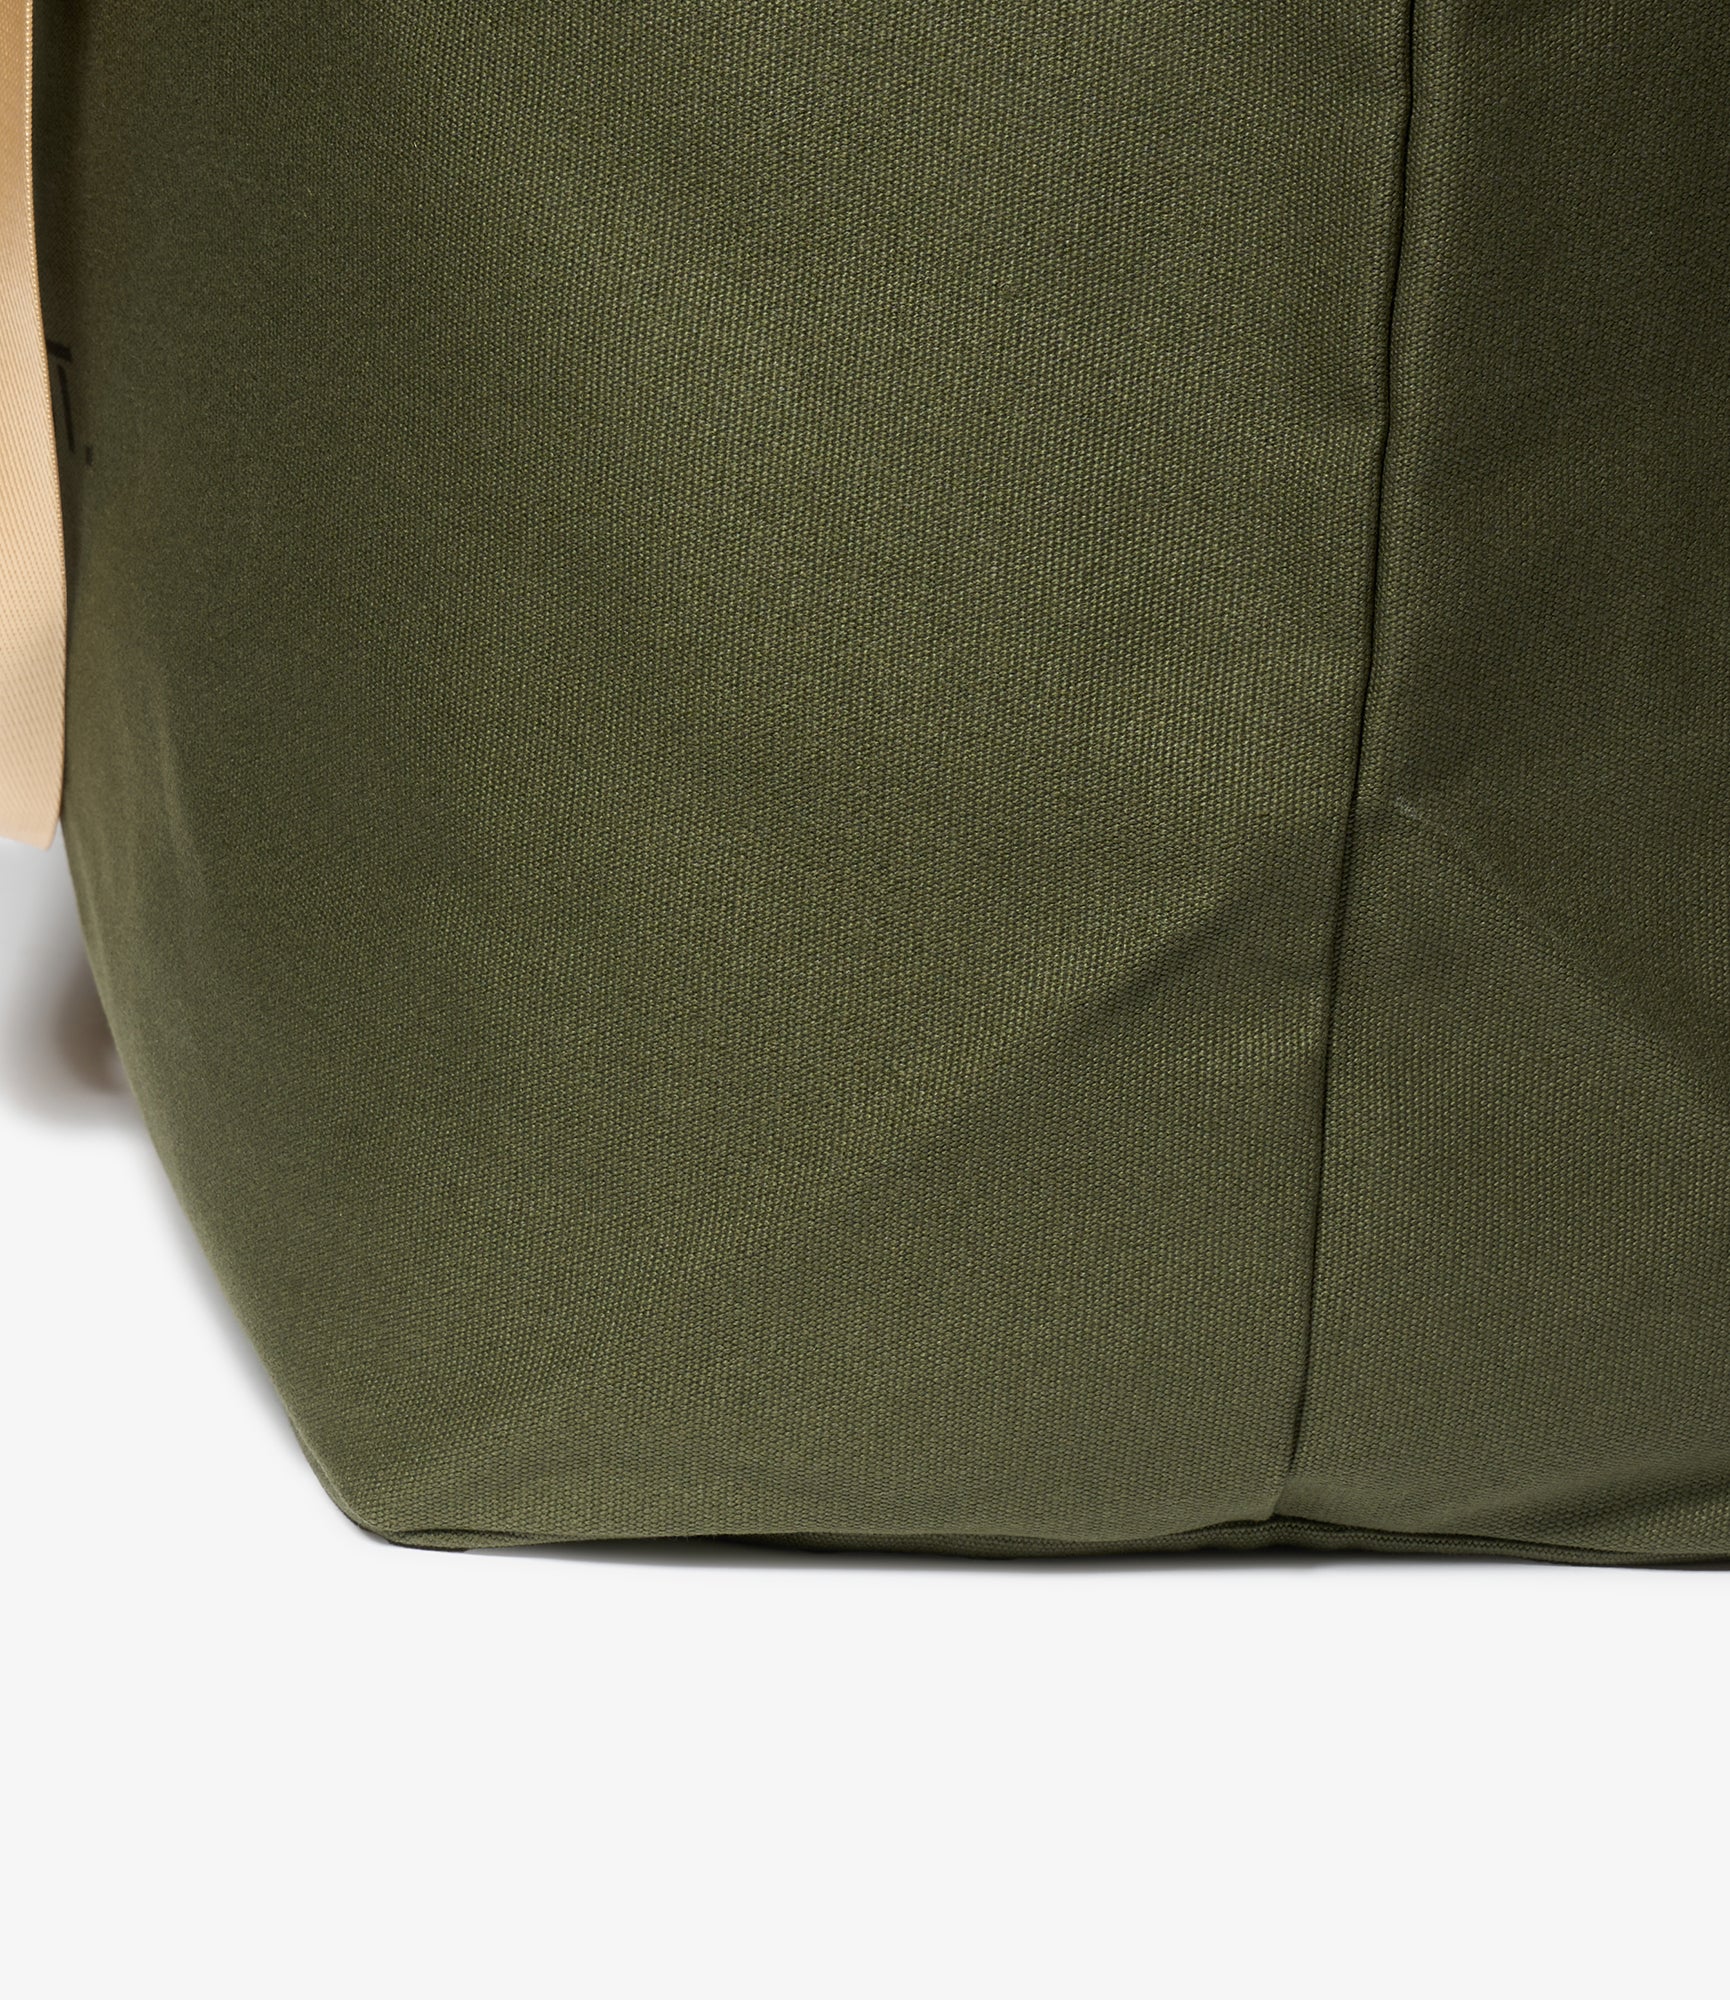 NNY Canvas Tote Bag - Large - Olive - Recycled Canvas